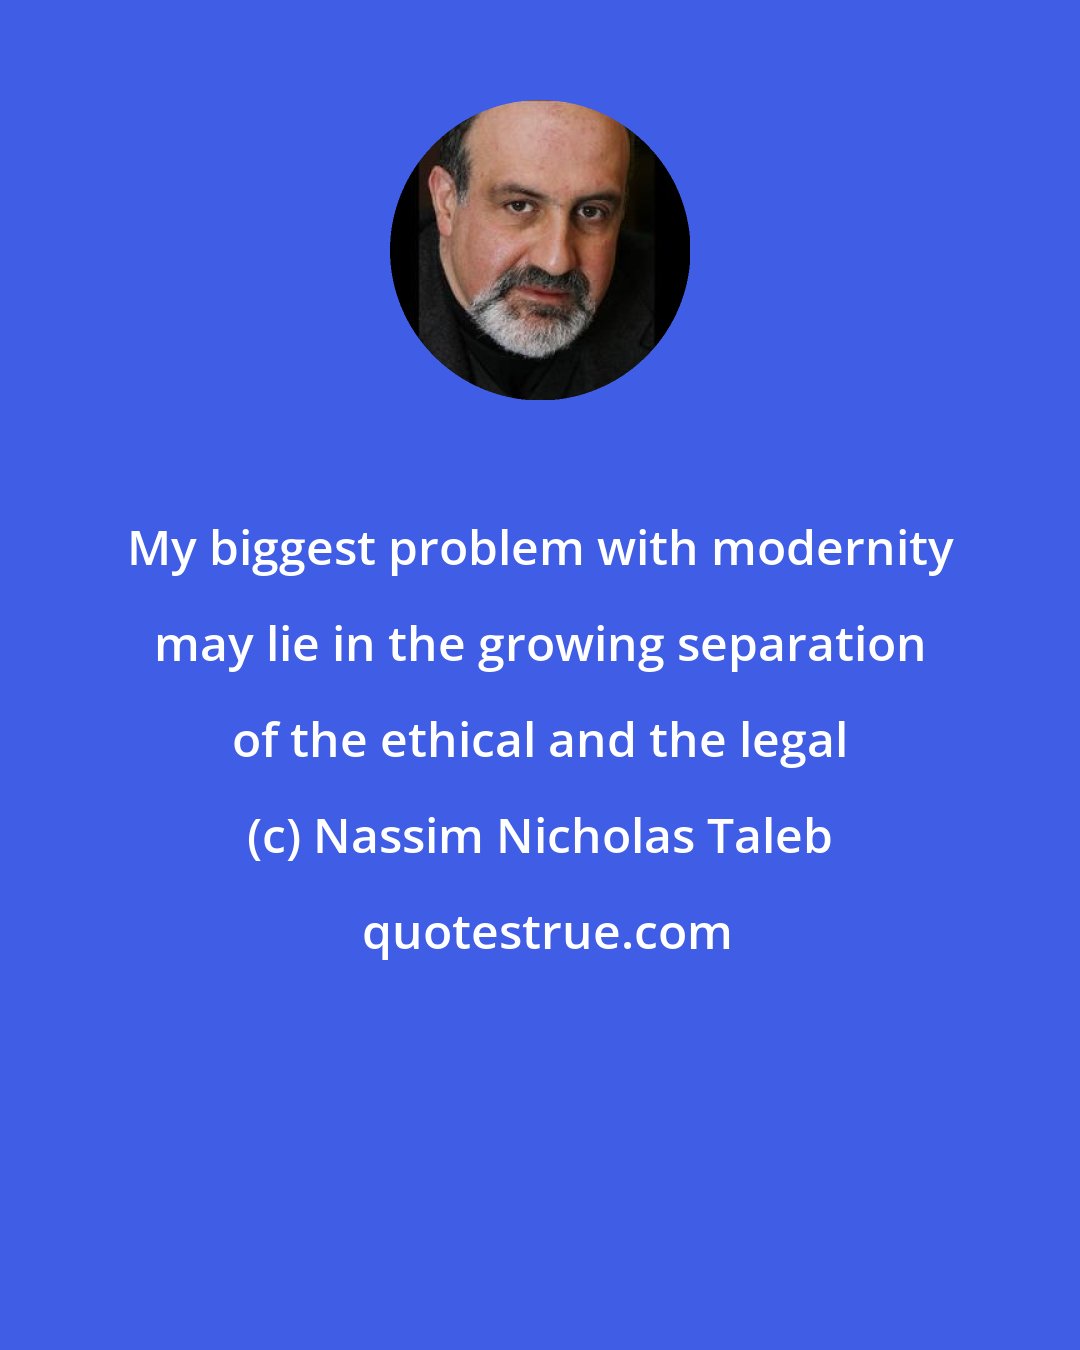 Nassim Nicholas Taleb: My biggest problem with modernity may lie in the growing separation of the ethical and the legal